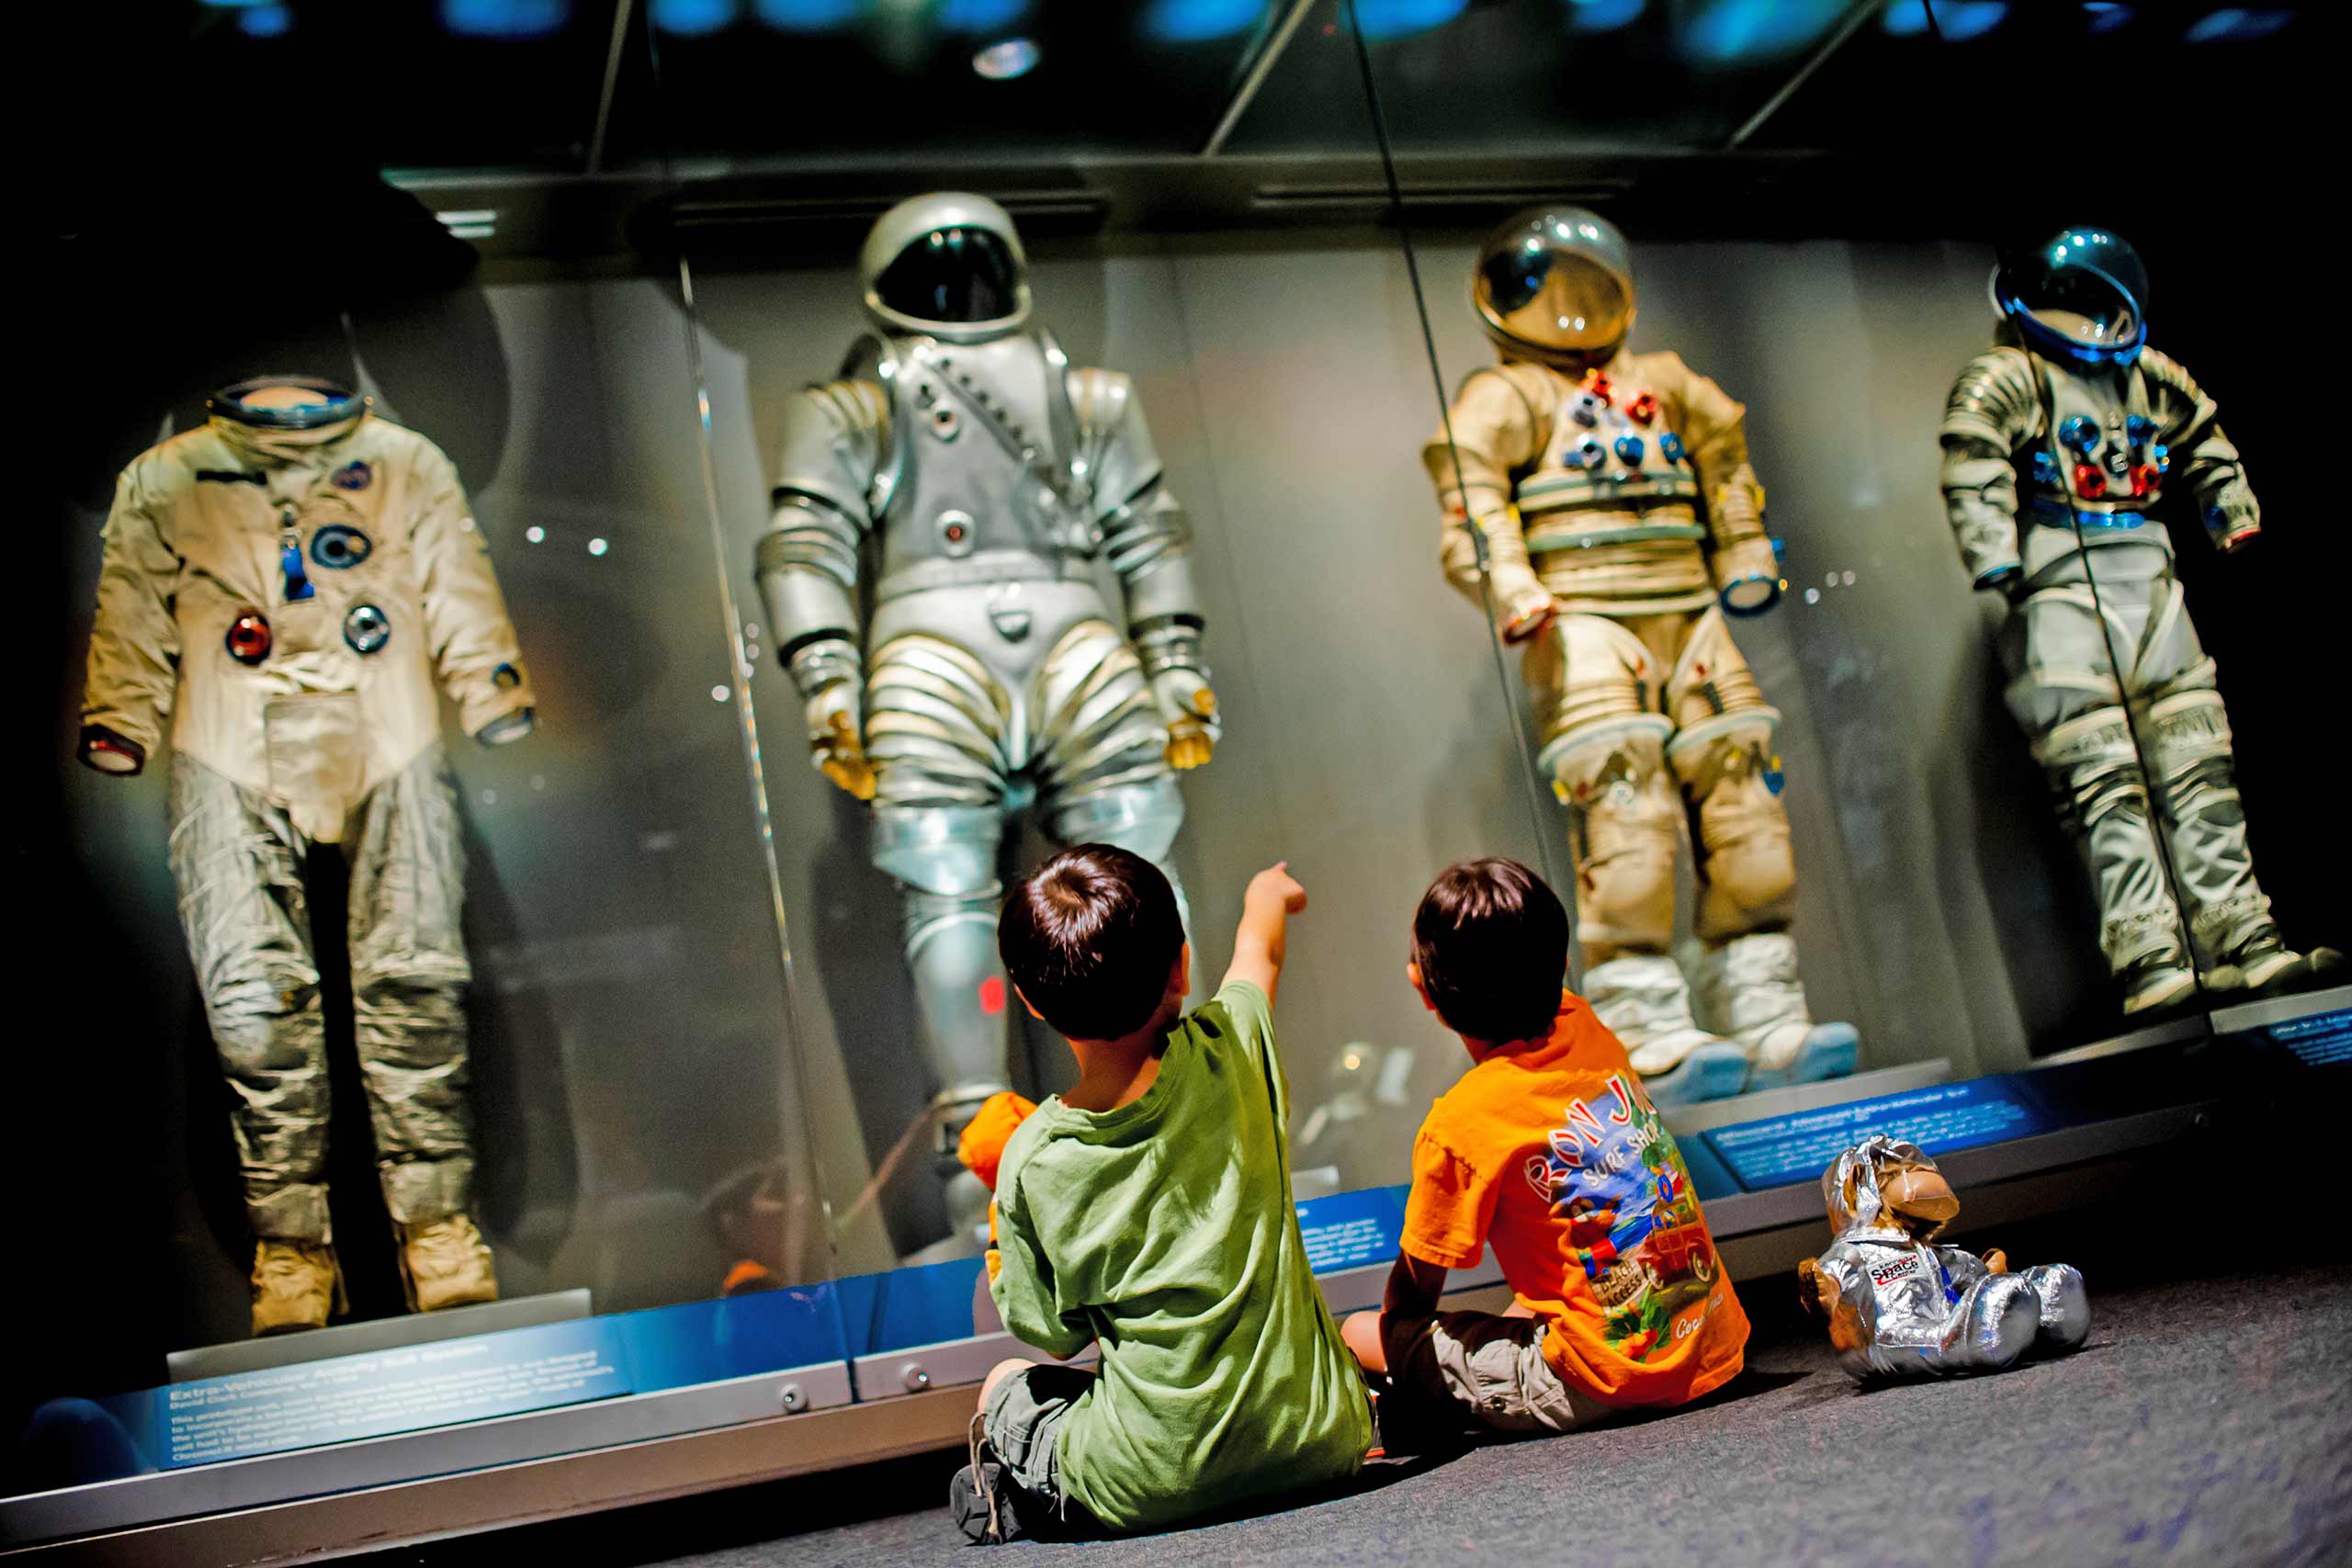 Two young boys admiring space suits on display.